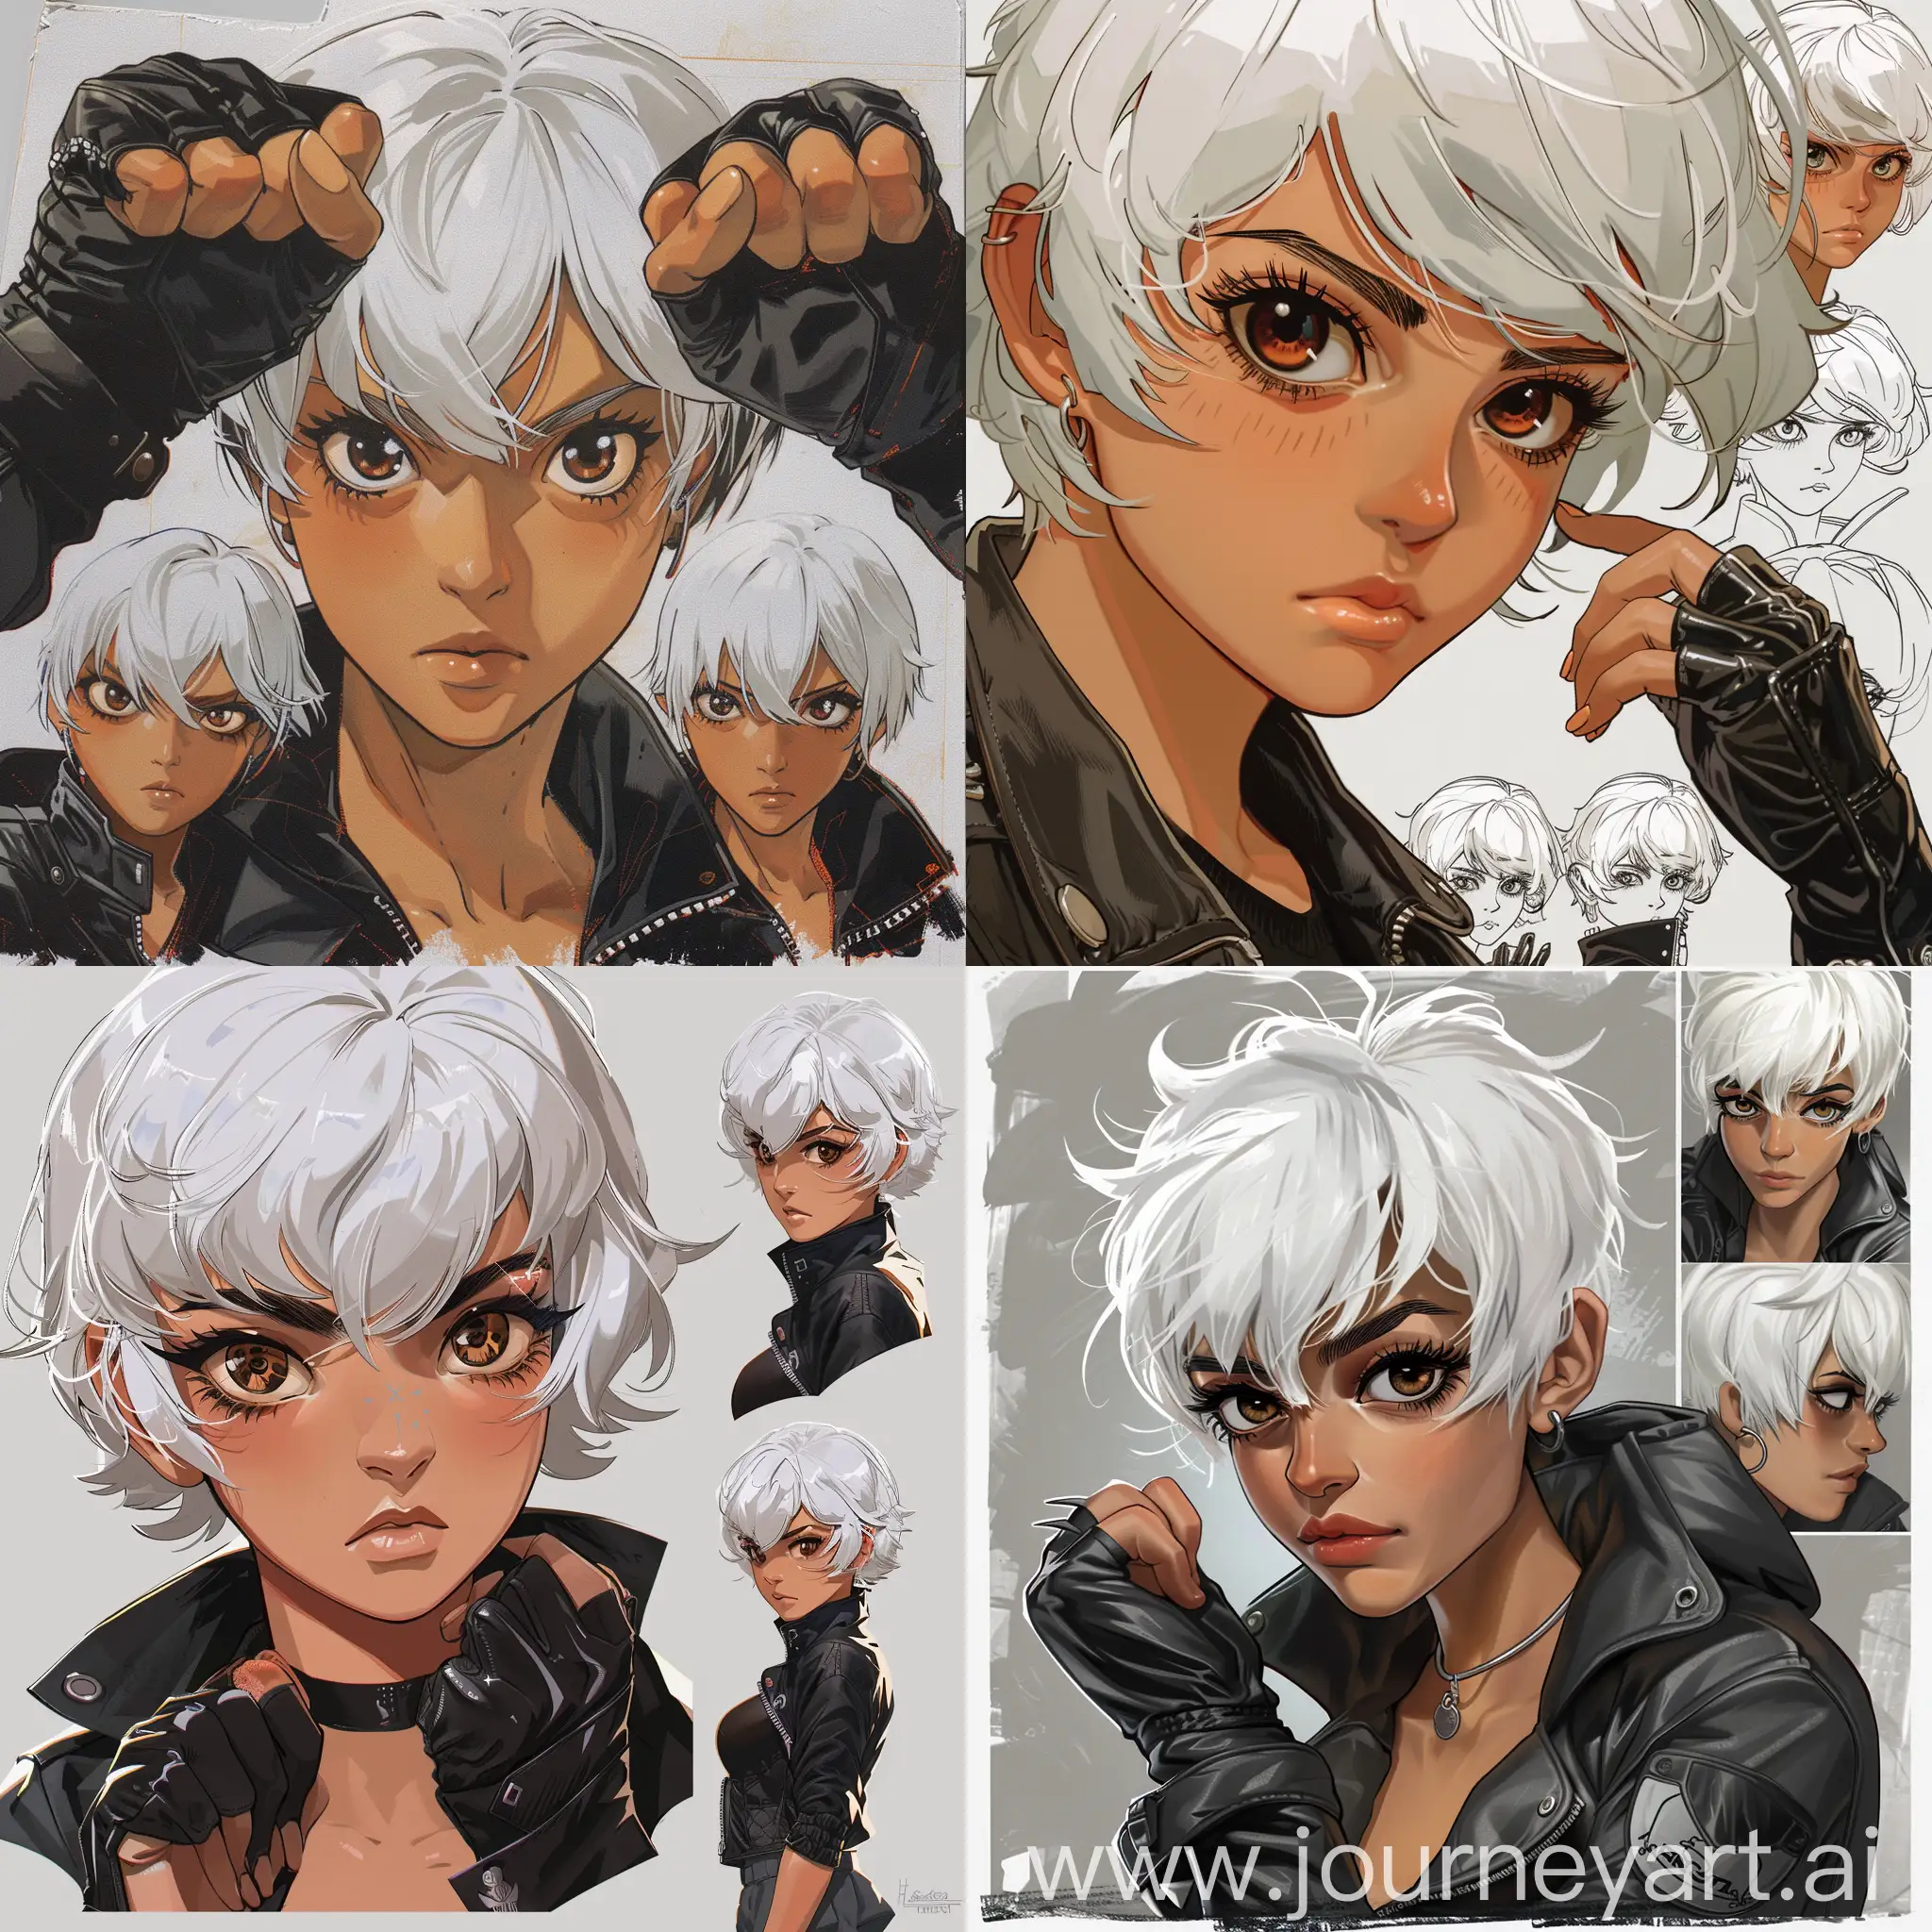 Stylish-Anime-Warrior-with-Fluffy-White-Hair-and-Sharp-Brown-Eyes